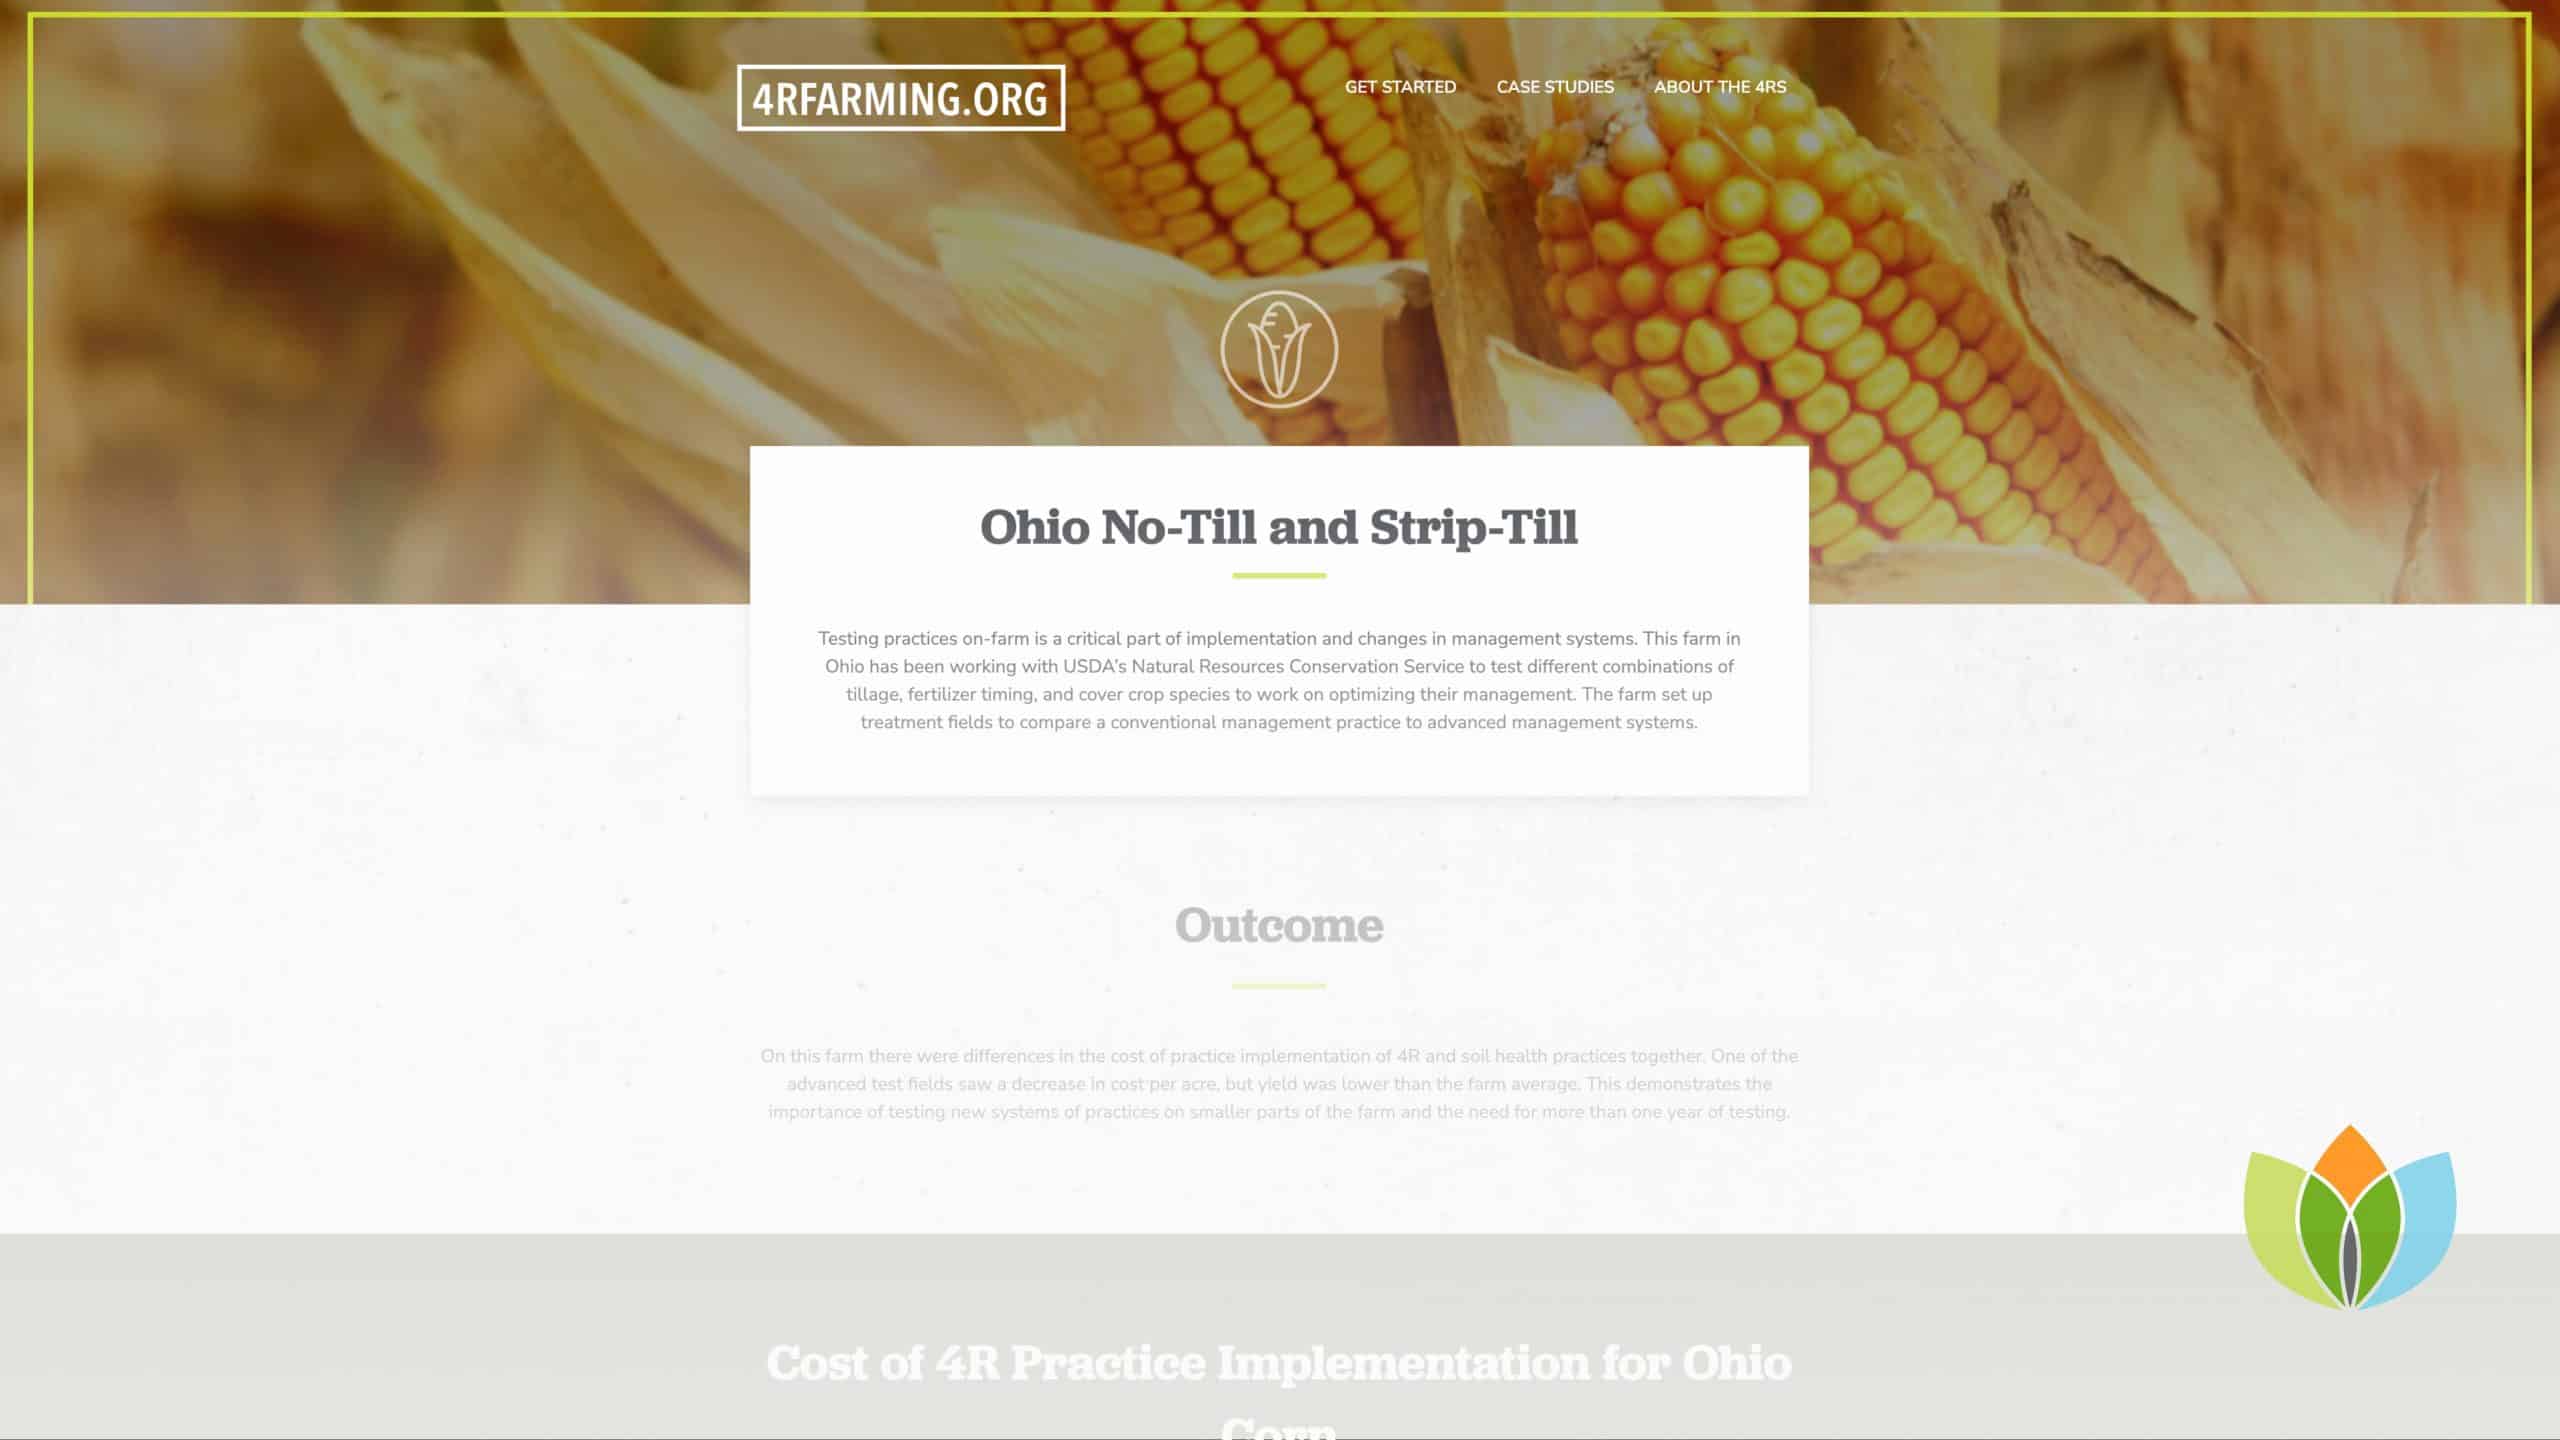 Ohio corn farm realizes importance of testing when implementing 4R practice change